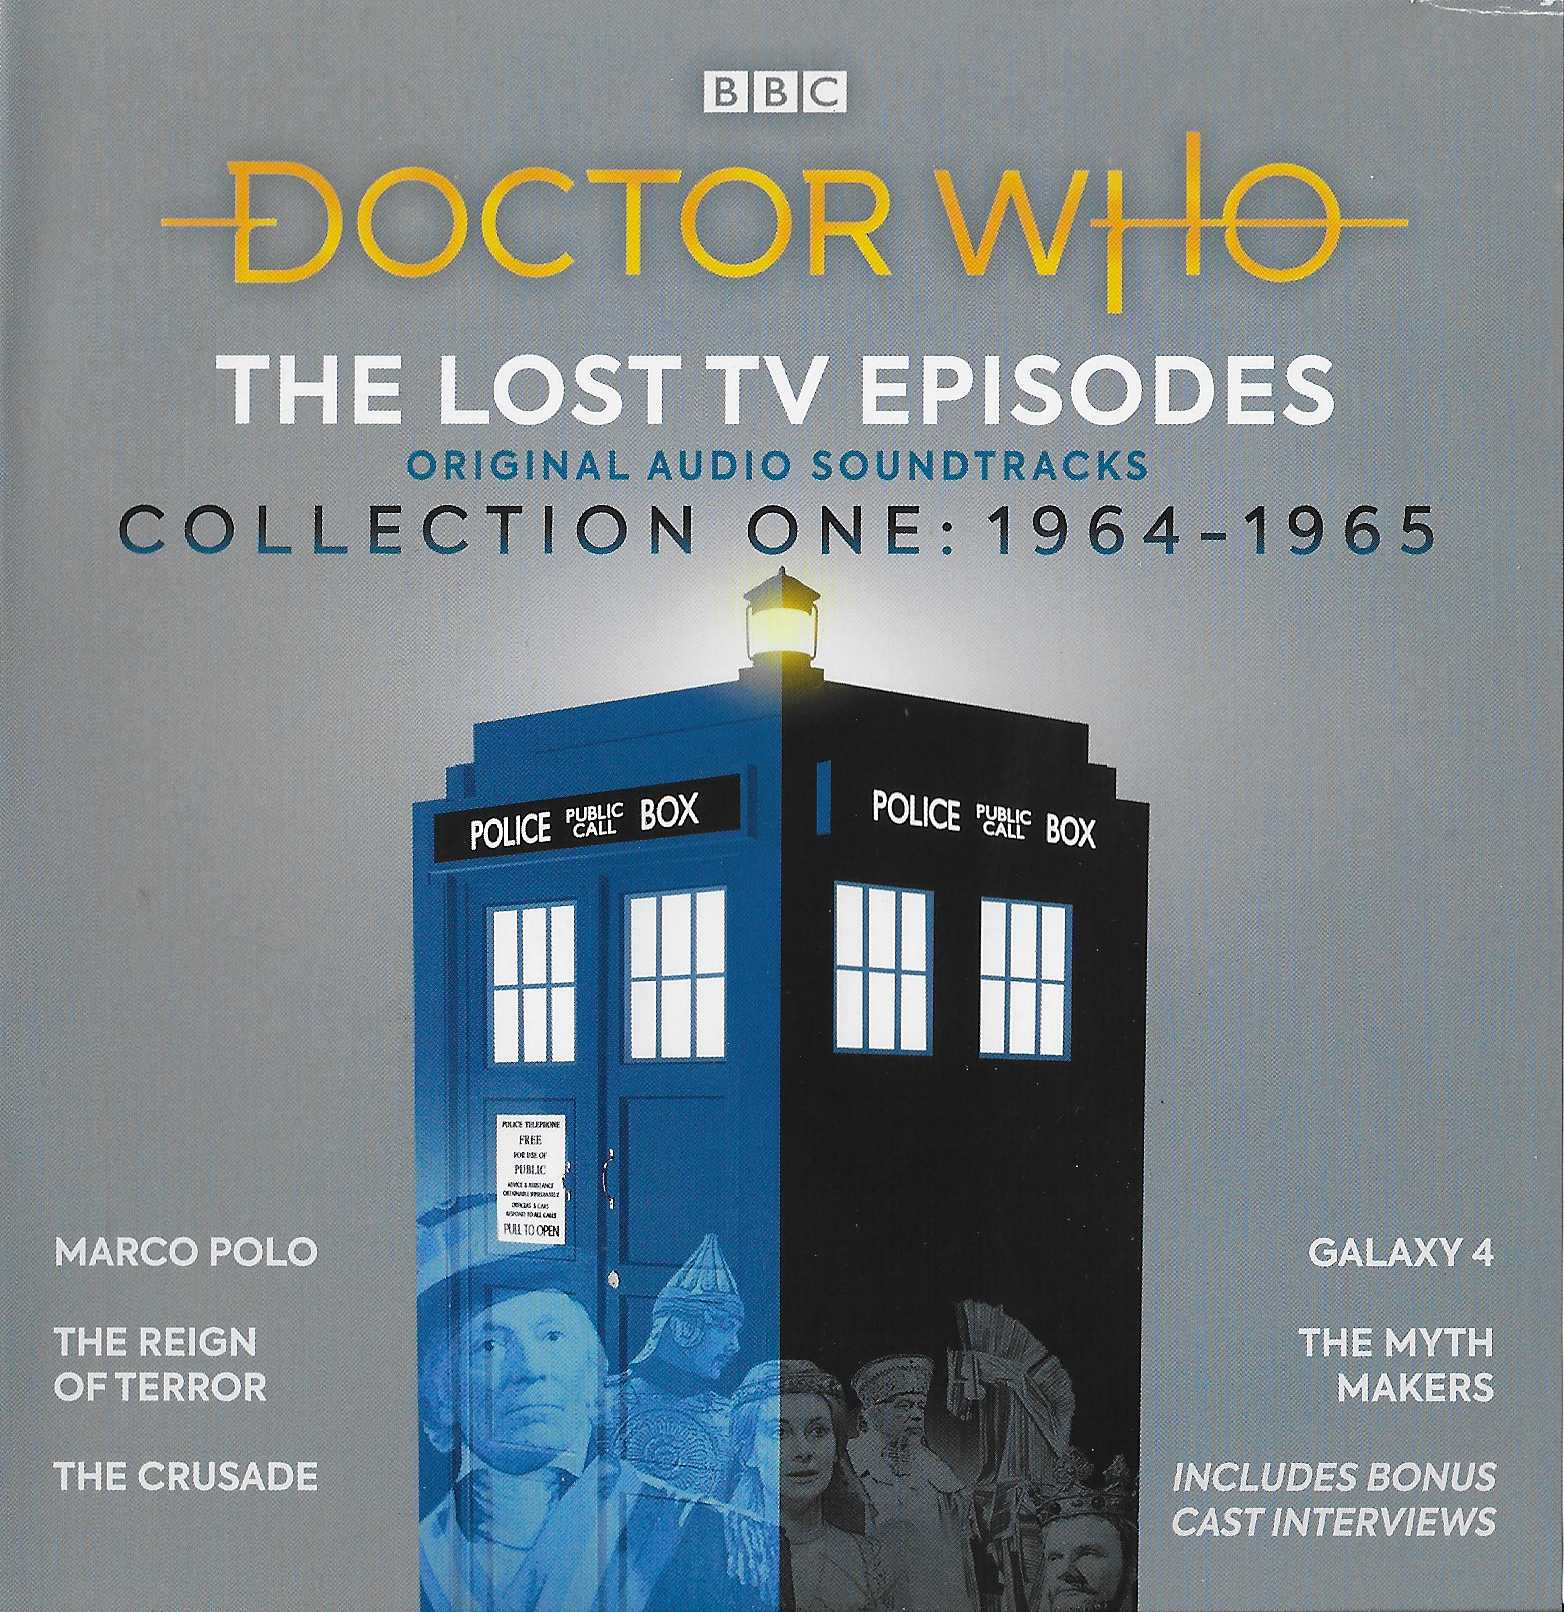 Picture of ISBN 978-1-78753-523-7 Doctor Who - The lost TV episodes - Collection one: 1964-1965 by artist Various from the BBC cds - Records and Tapes library